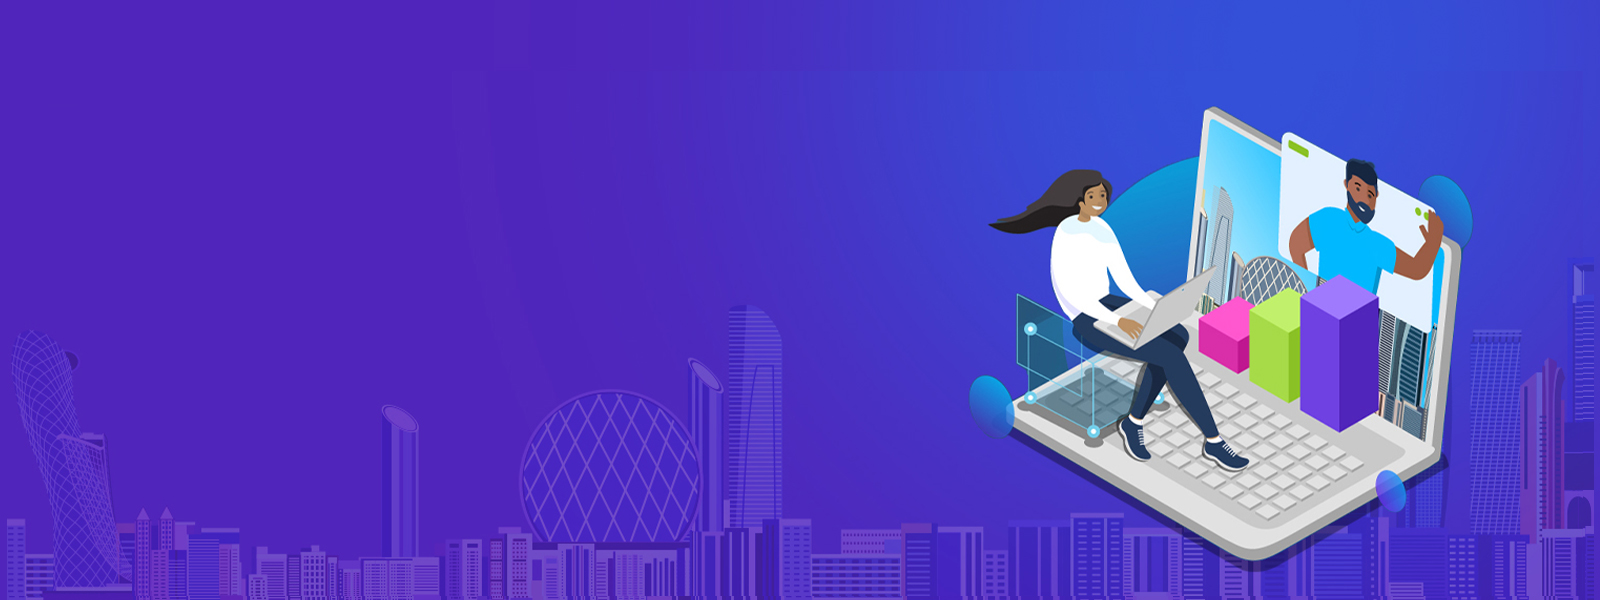 illustration Abu Dhabi Skyline in purple with woman with laptop in lap and a man in a video call